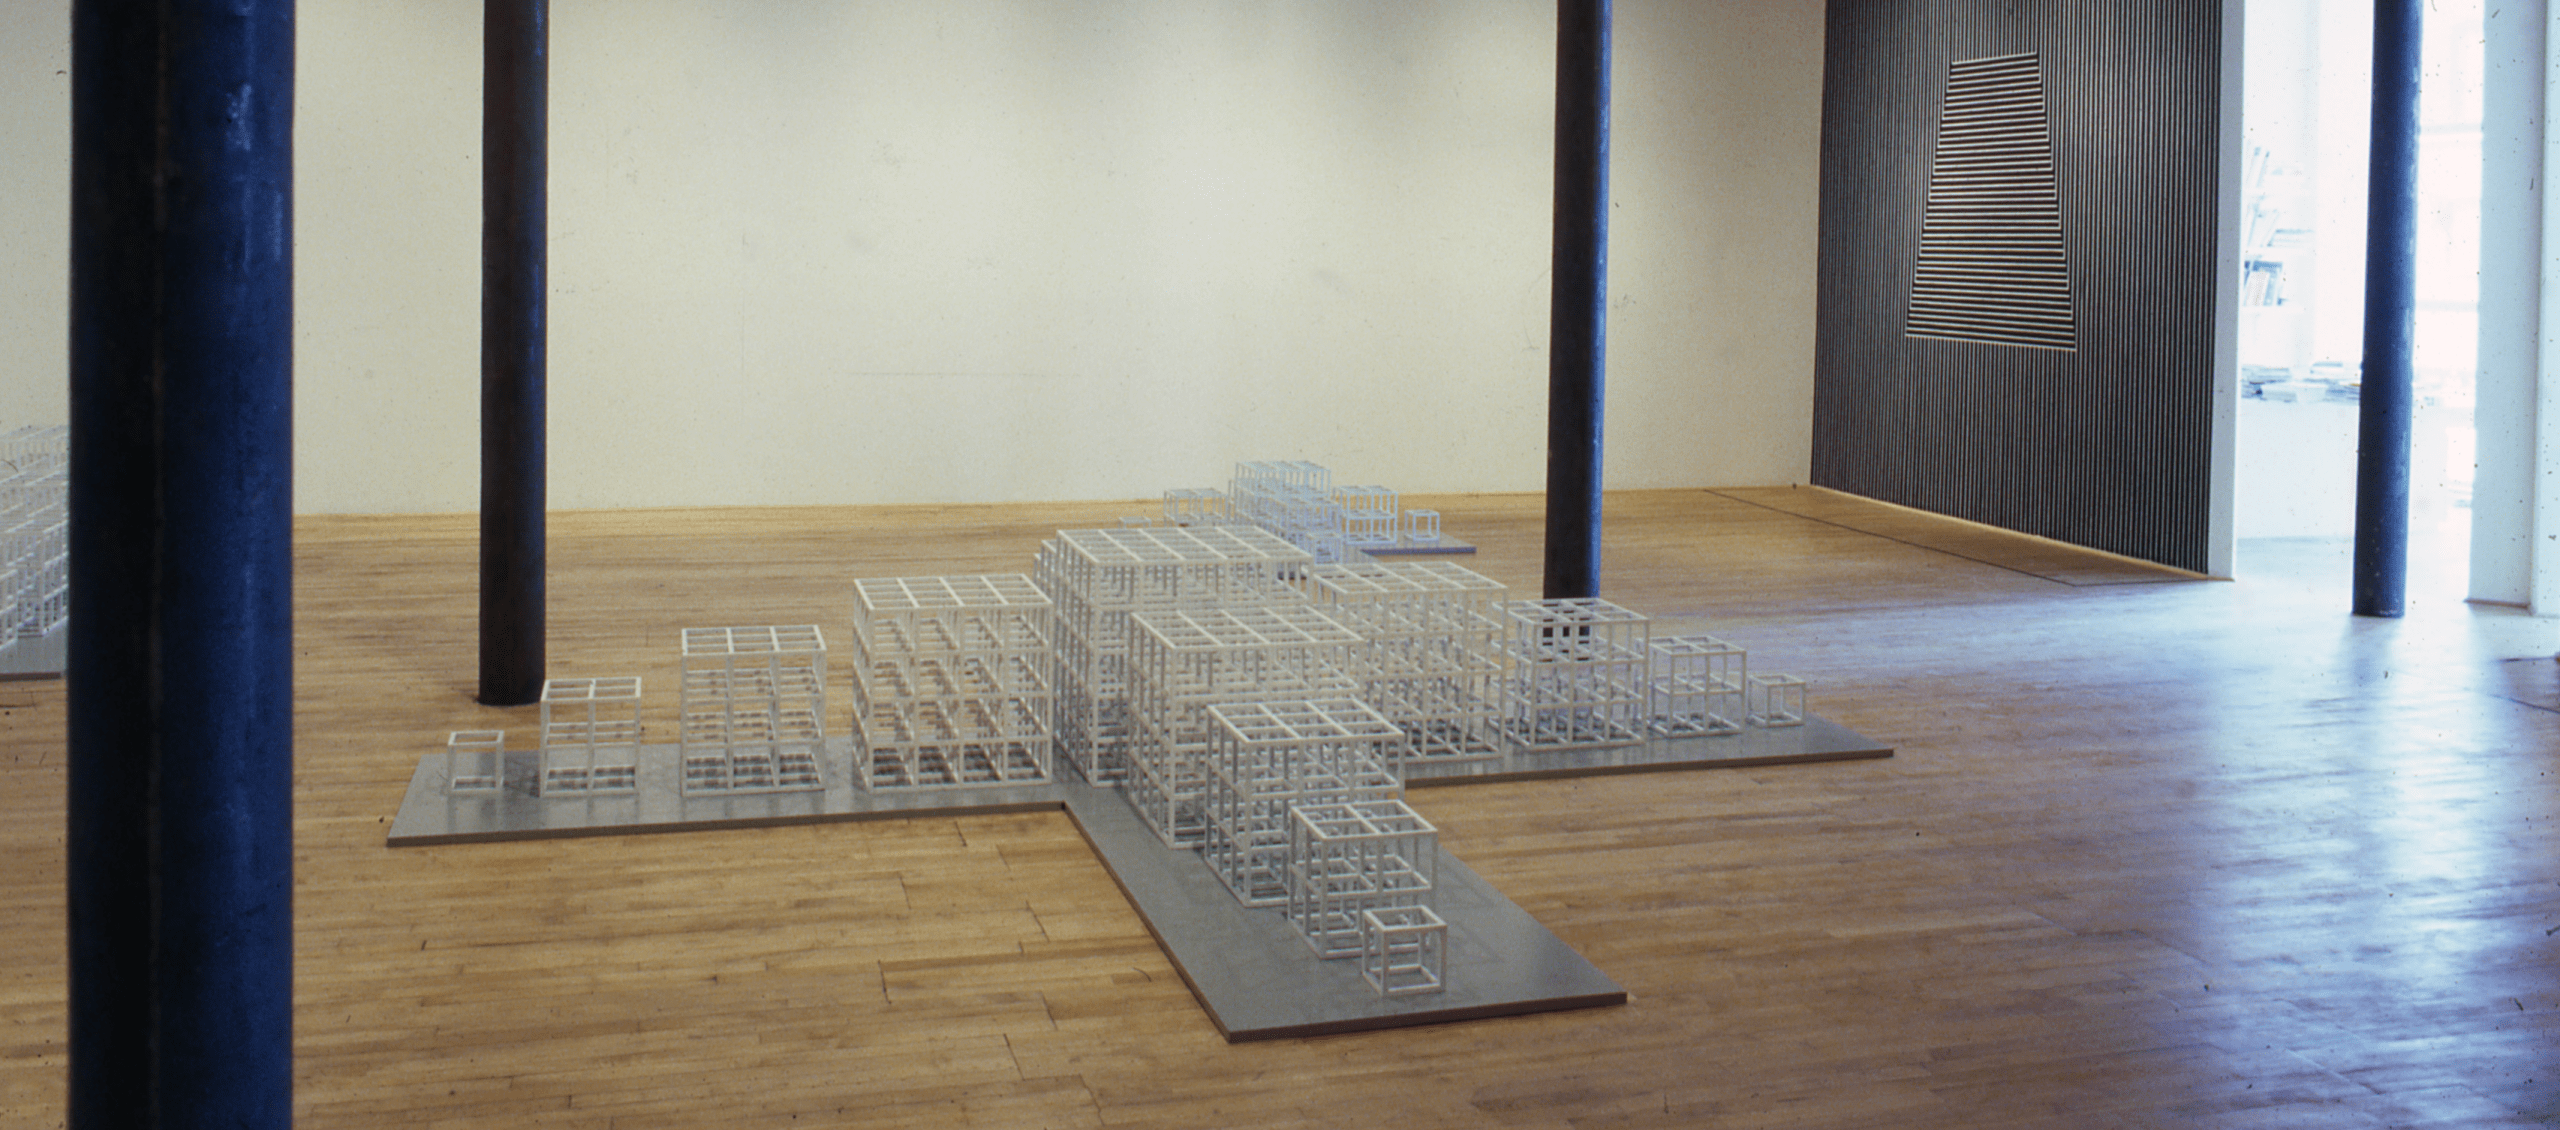 Installation view at Rhona Hoffman Gallery, Sol LeWitt, New Structures, Wall Drawing, Drawings, 1980. 